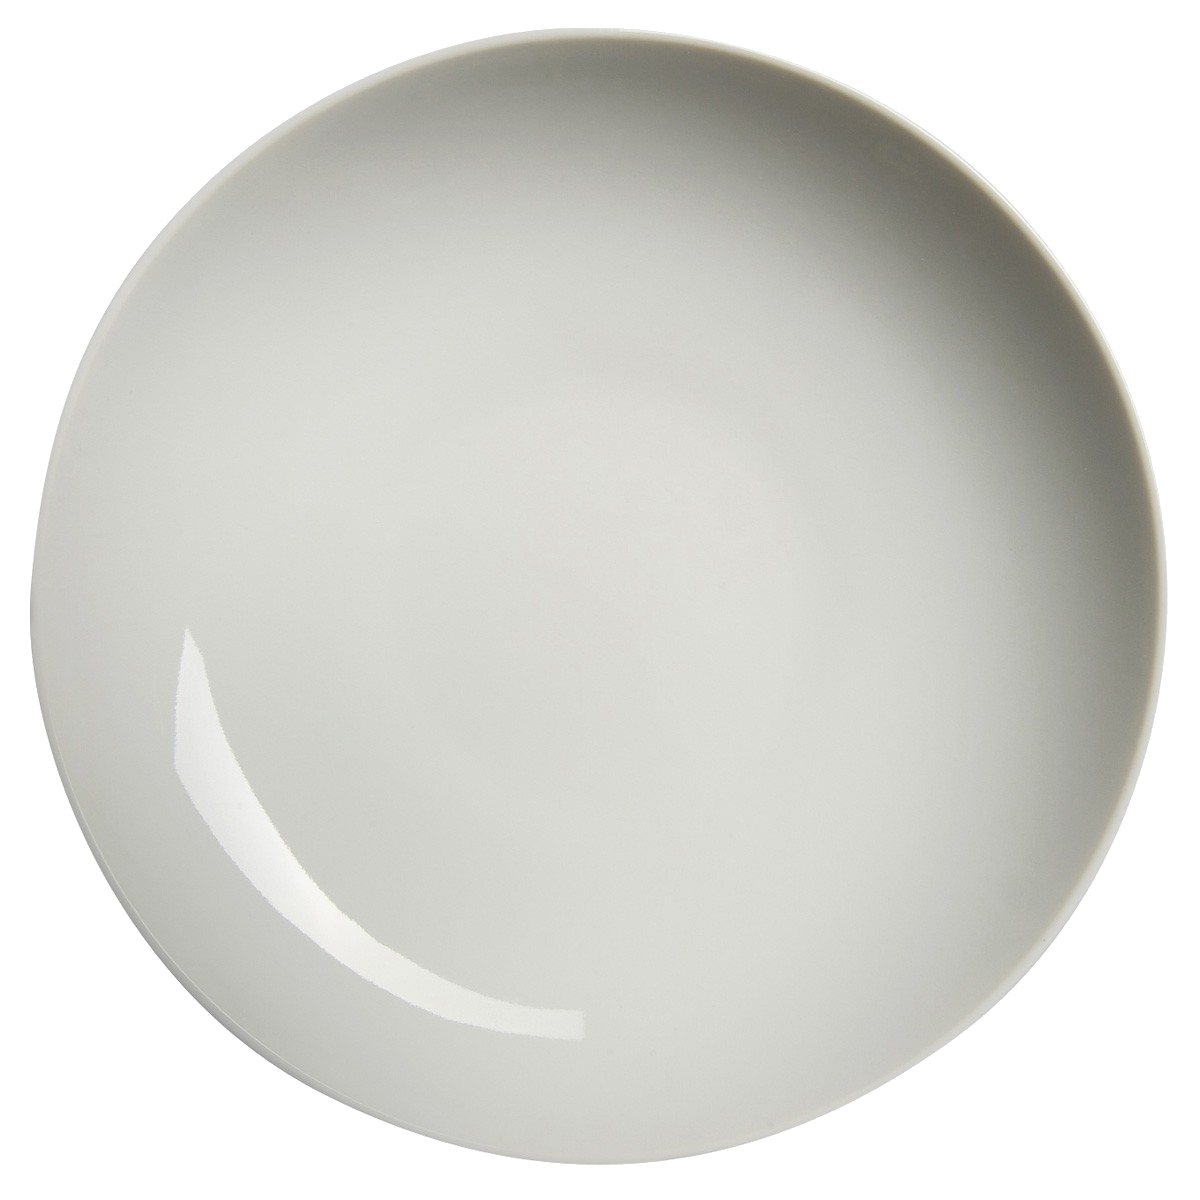 Plate PNG image transparent image download, size: 1200x1200px